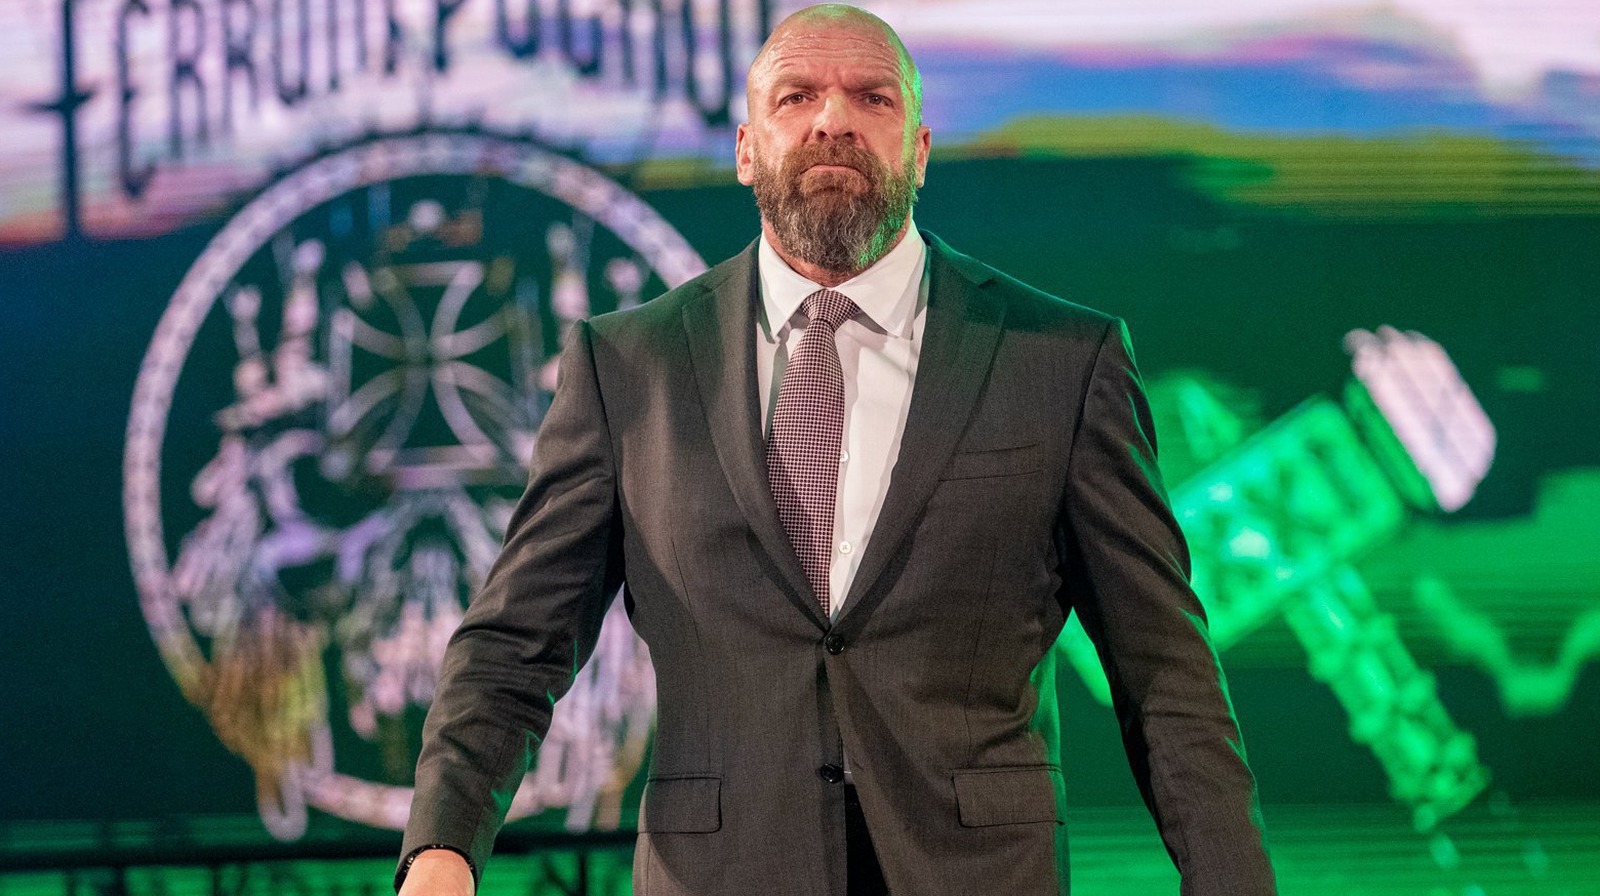 Triple H Announces Money In The Bank As Highest Grossing Arena Event In WWE History